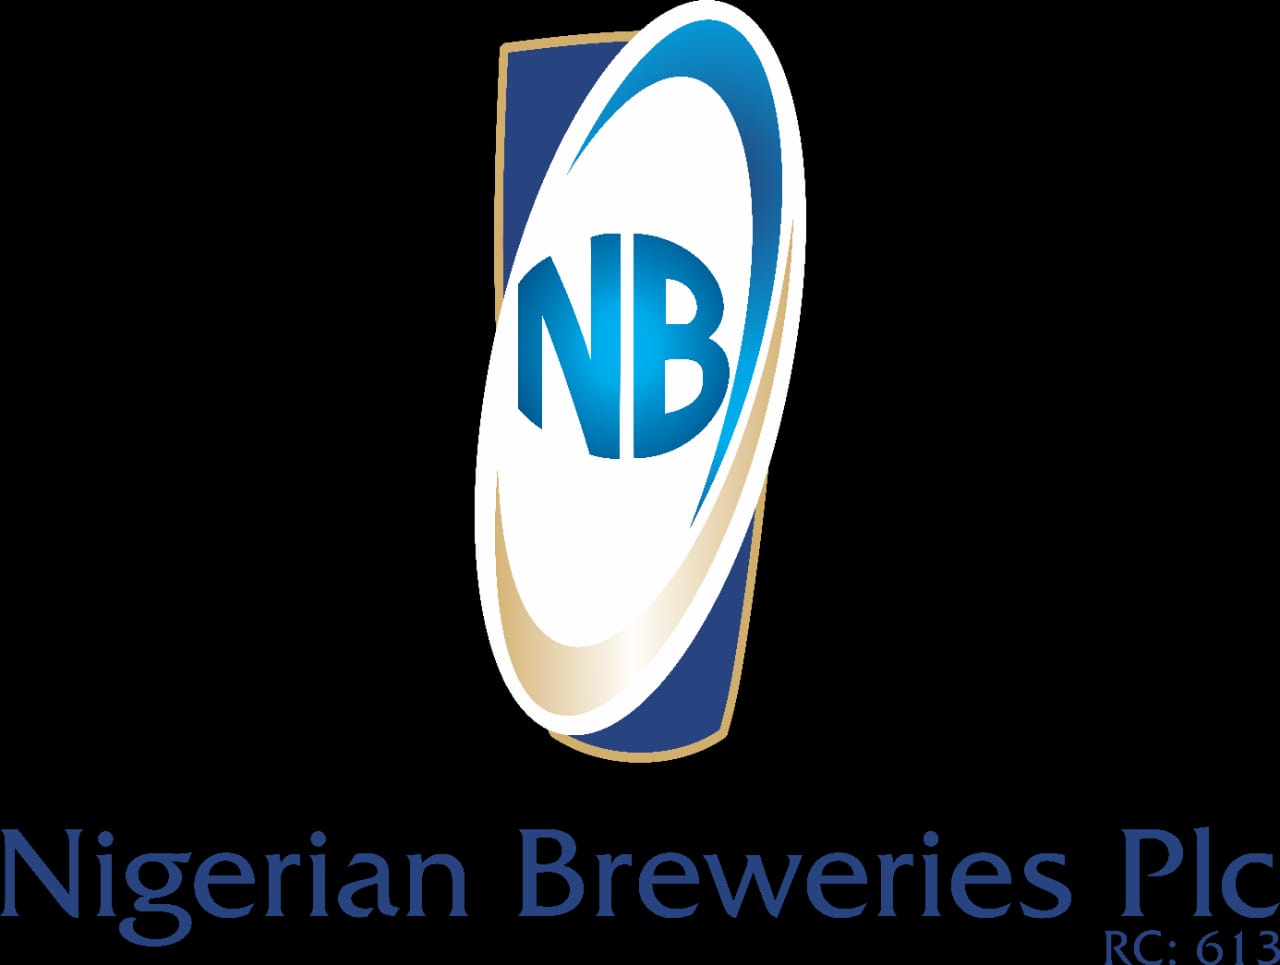 Nigerian Breweries embarks on strategic recovery plan, to undertake ₦600 billion Rights Issue.